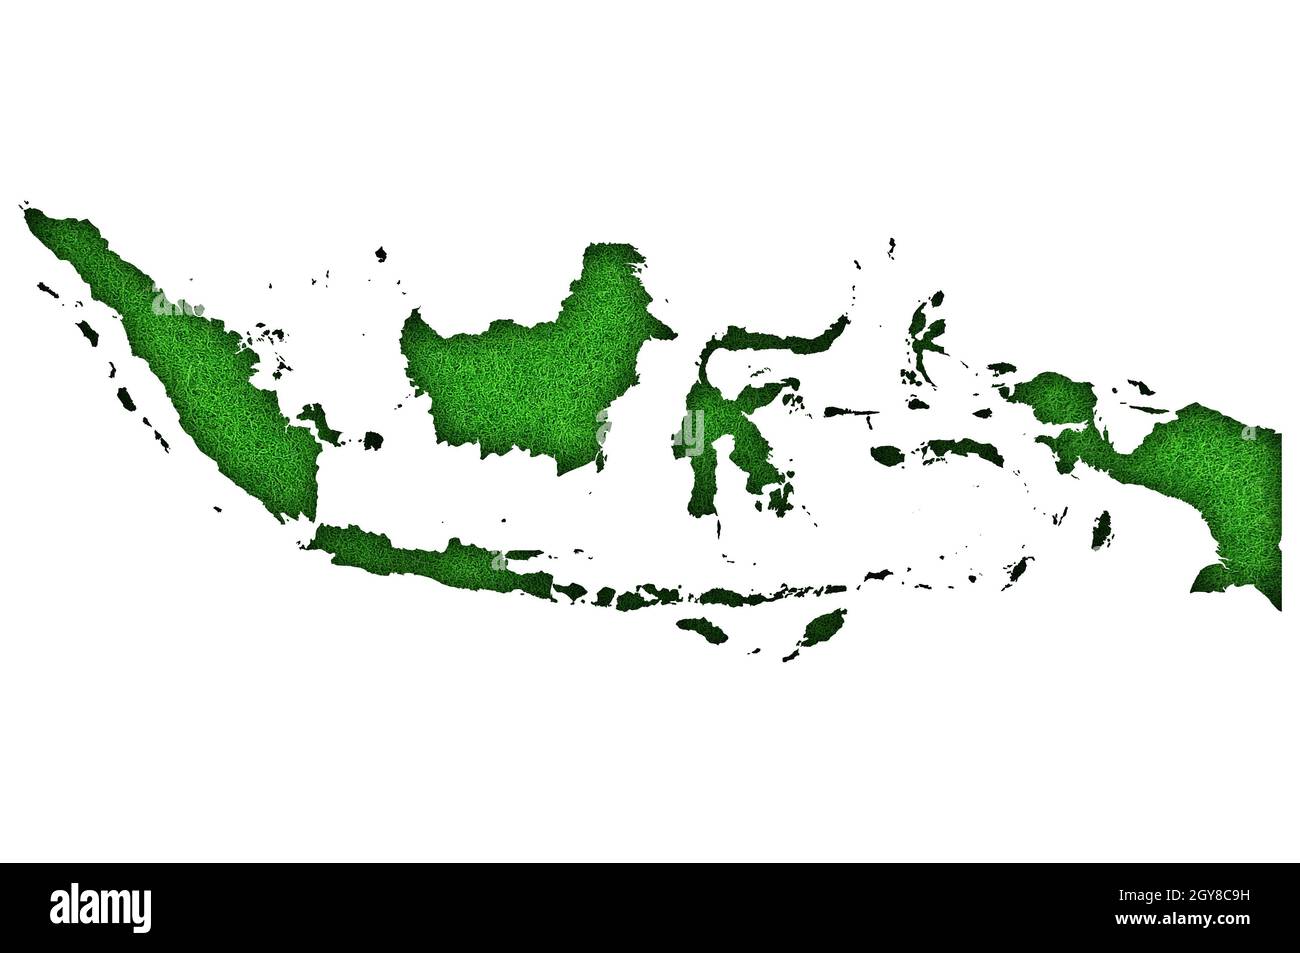 Map of Indonesia on green felt Stock Photo